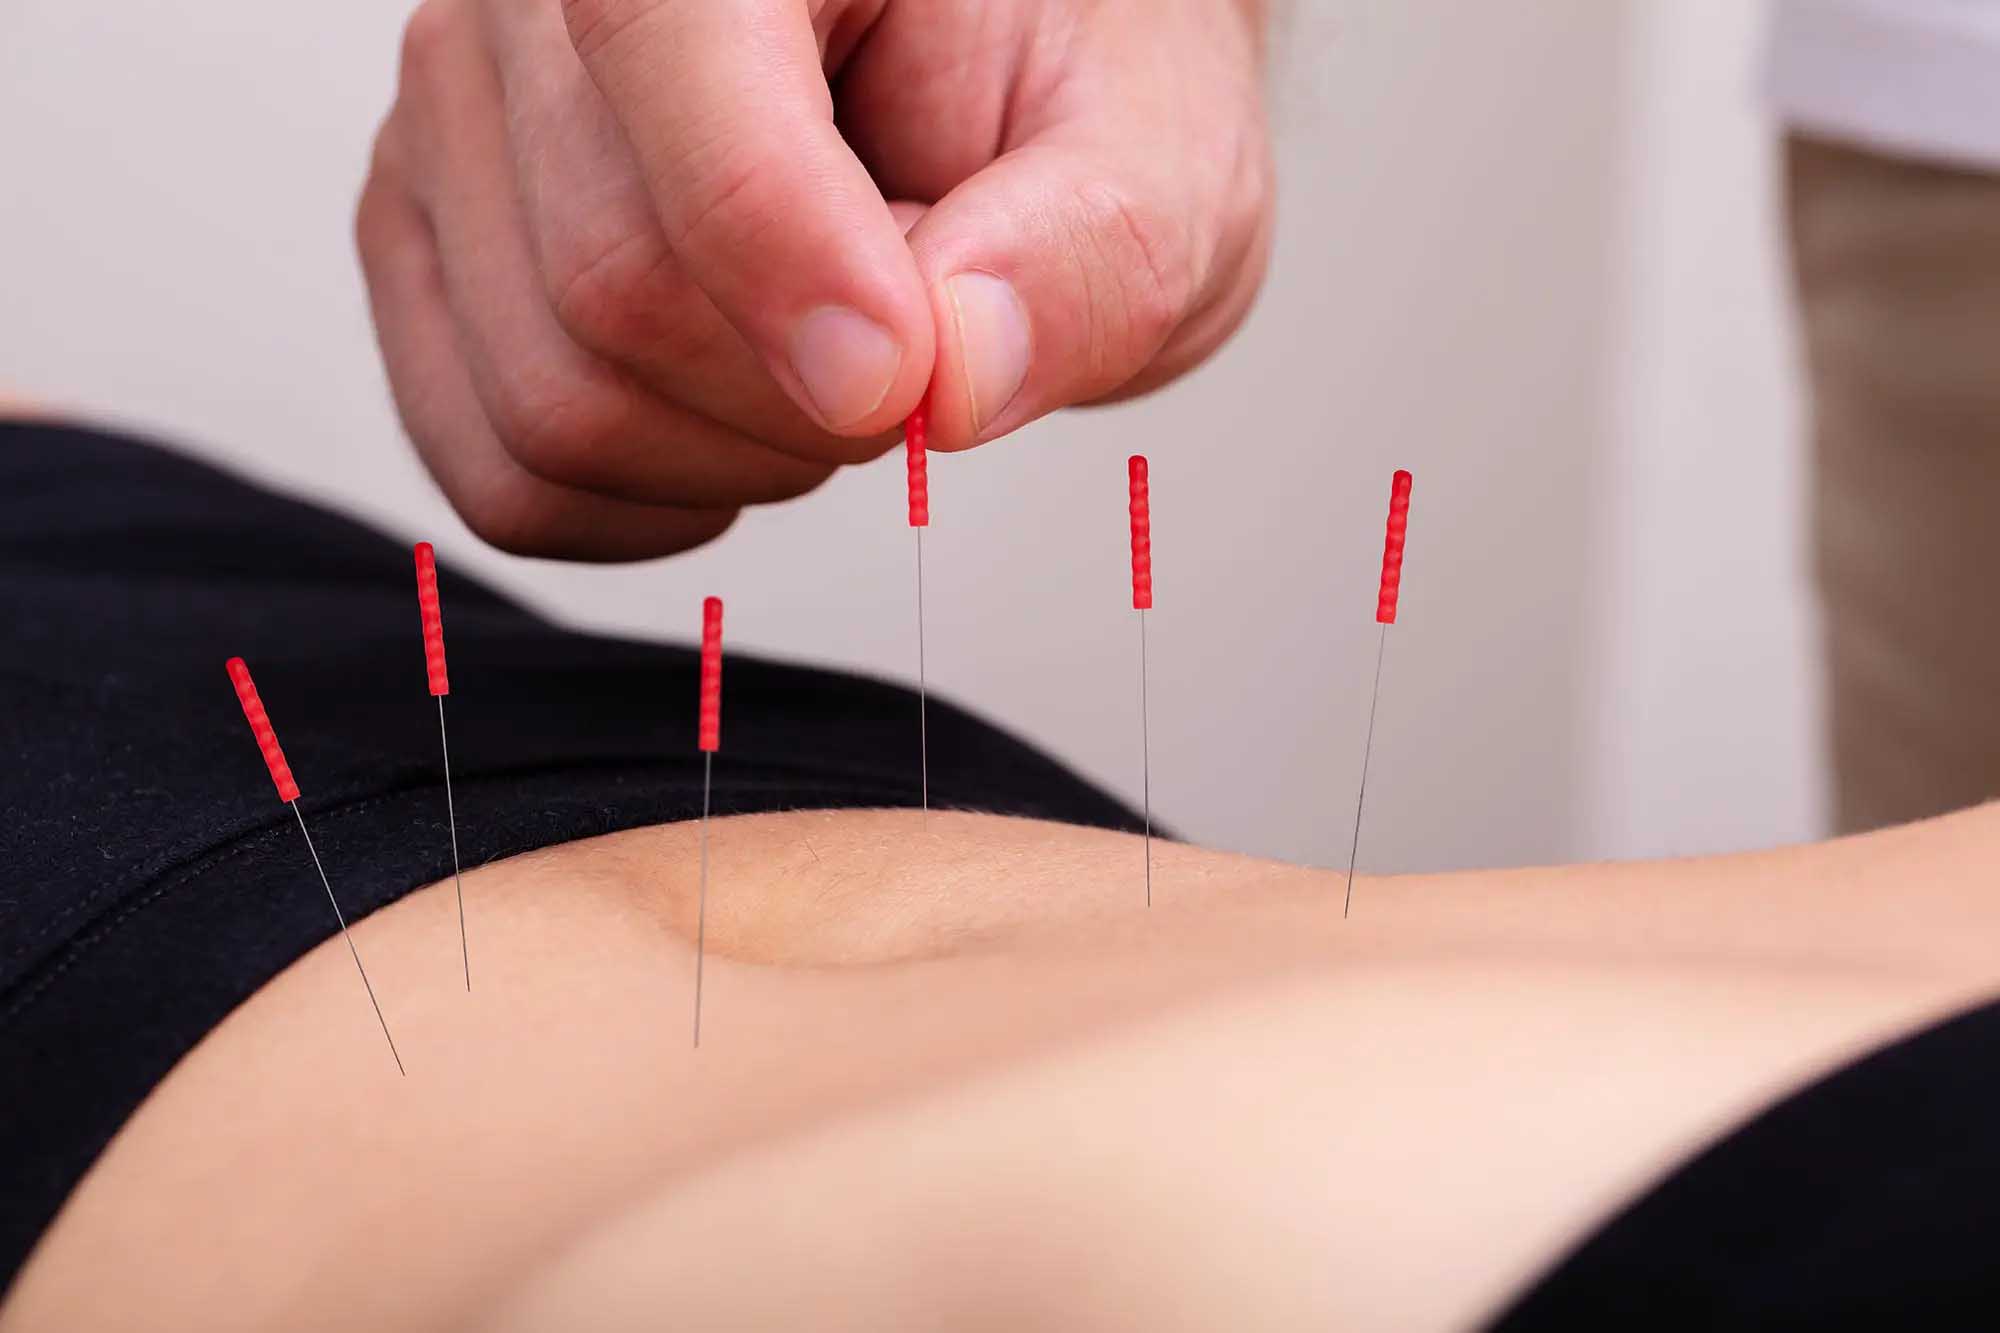 Does Acupuncture Have a Role in Chronic Pain Treatment